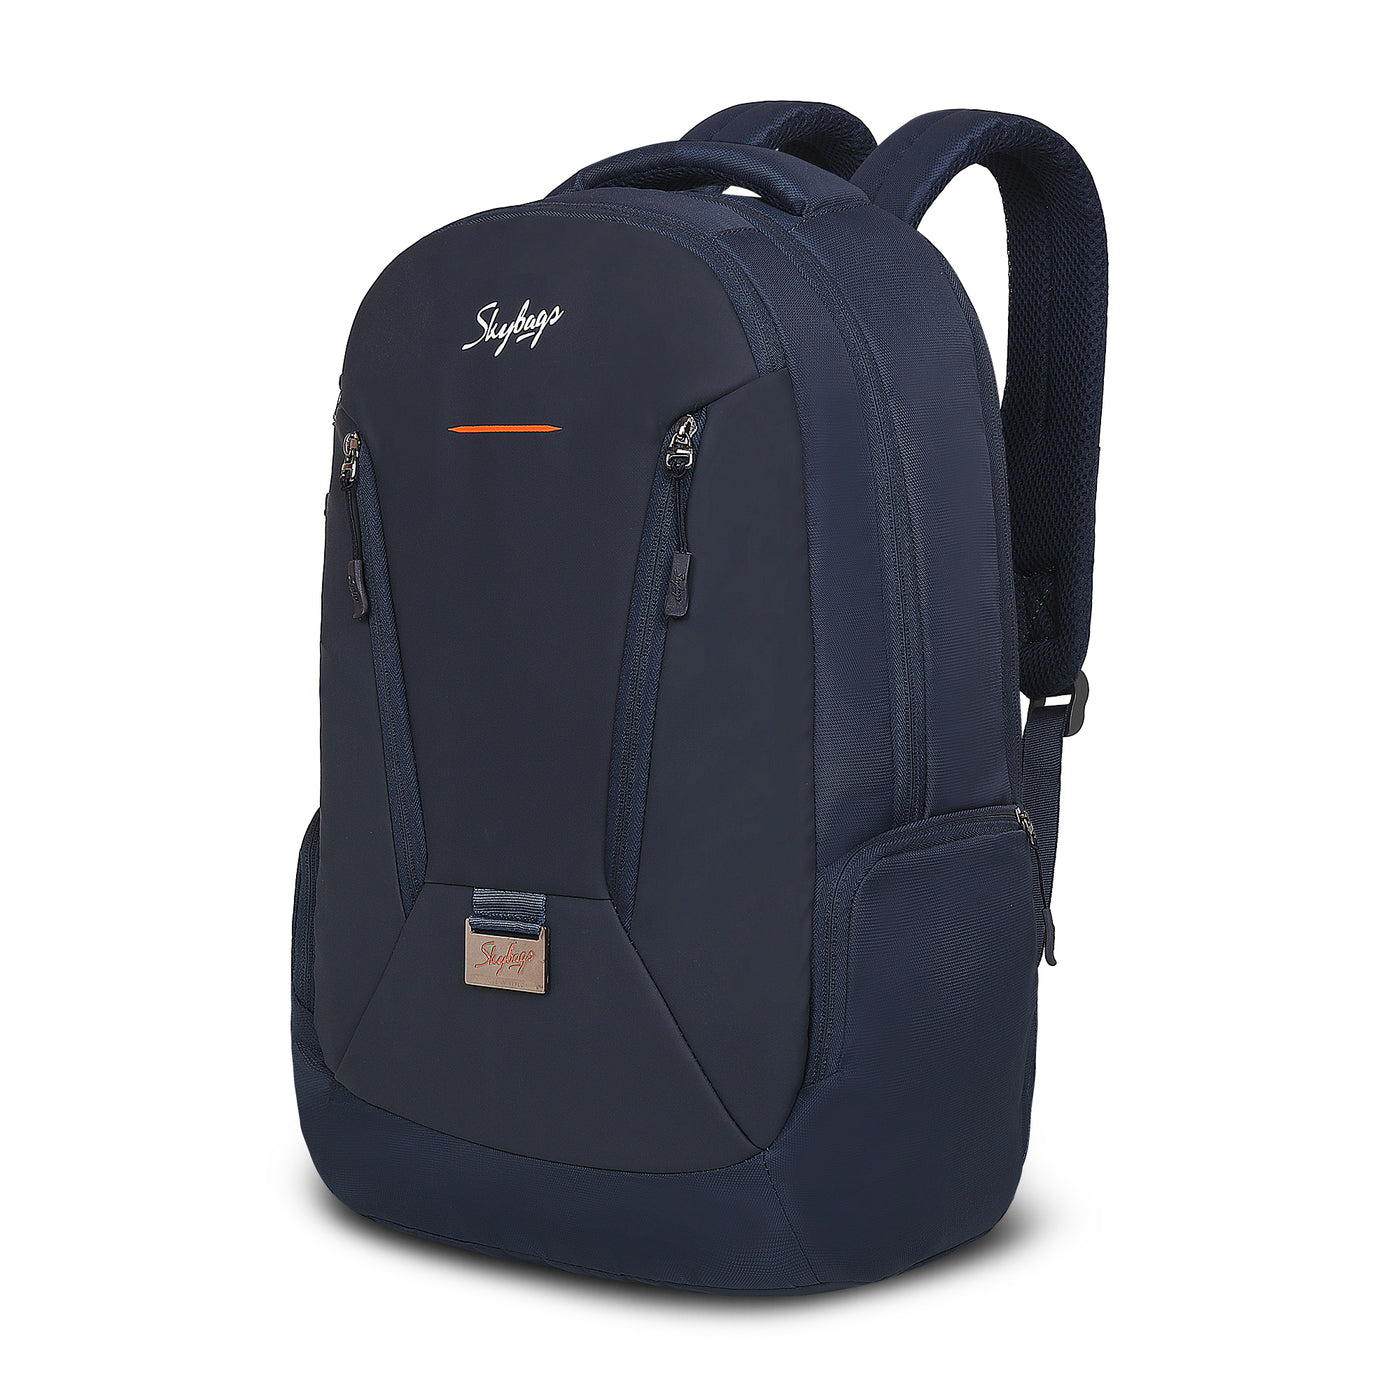 SKYBAGS ARTHUR LAPTOP BACKPACK GREY - MYBAGSTORE.IN